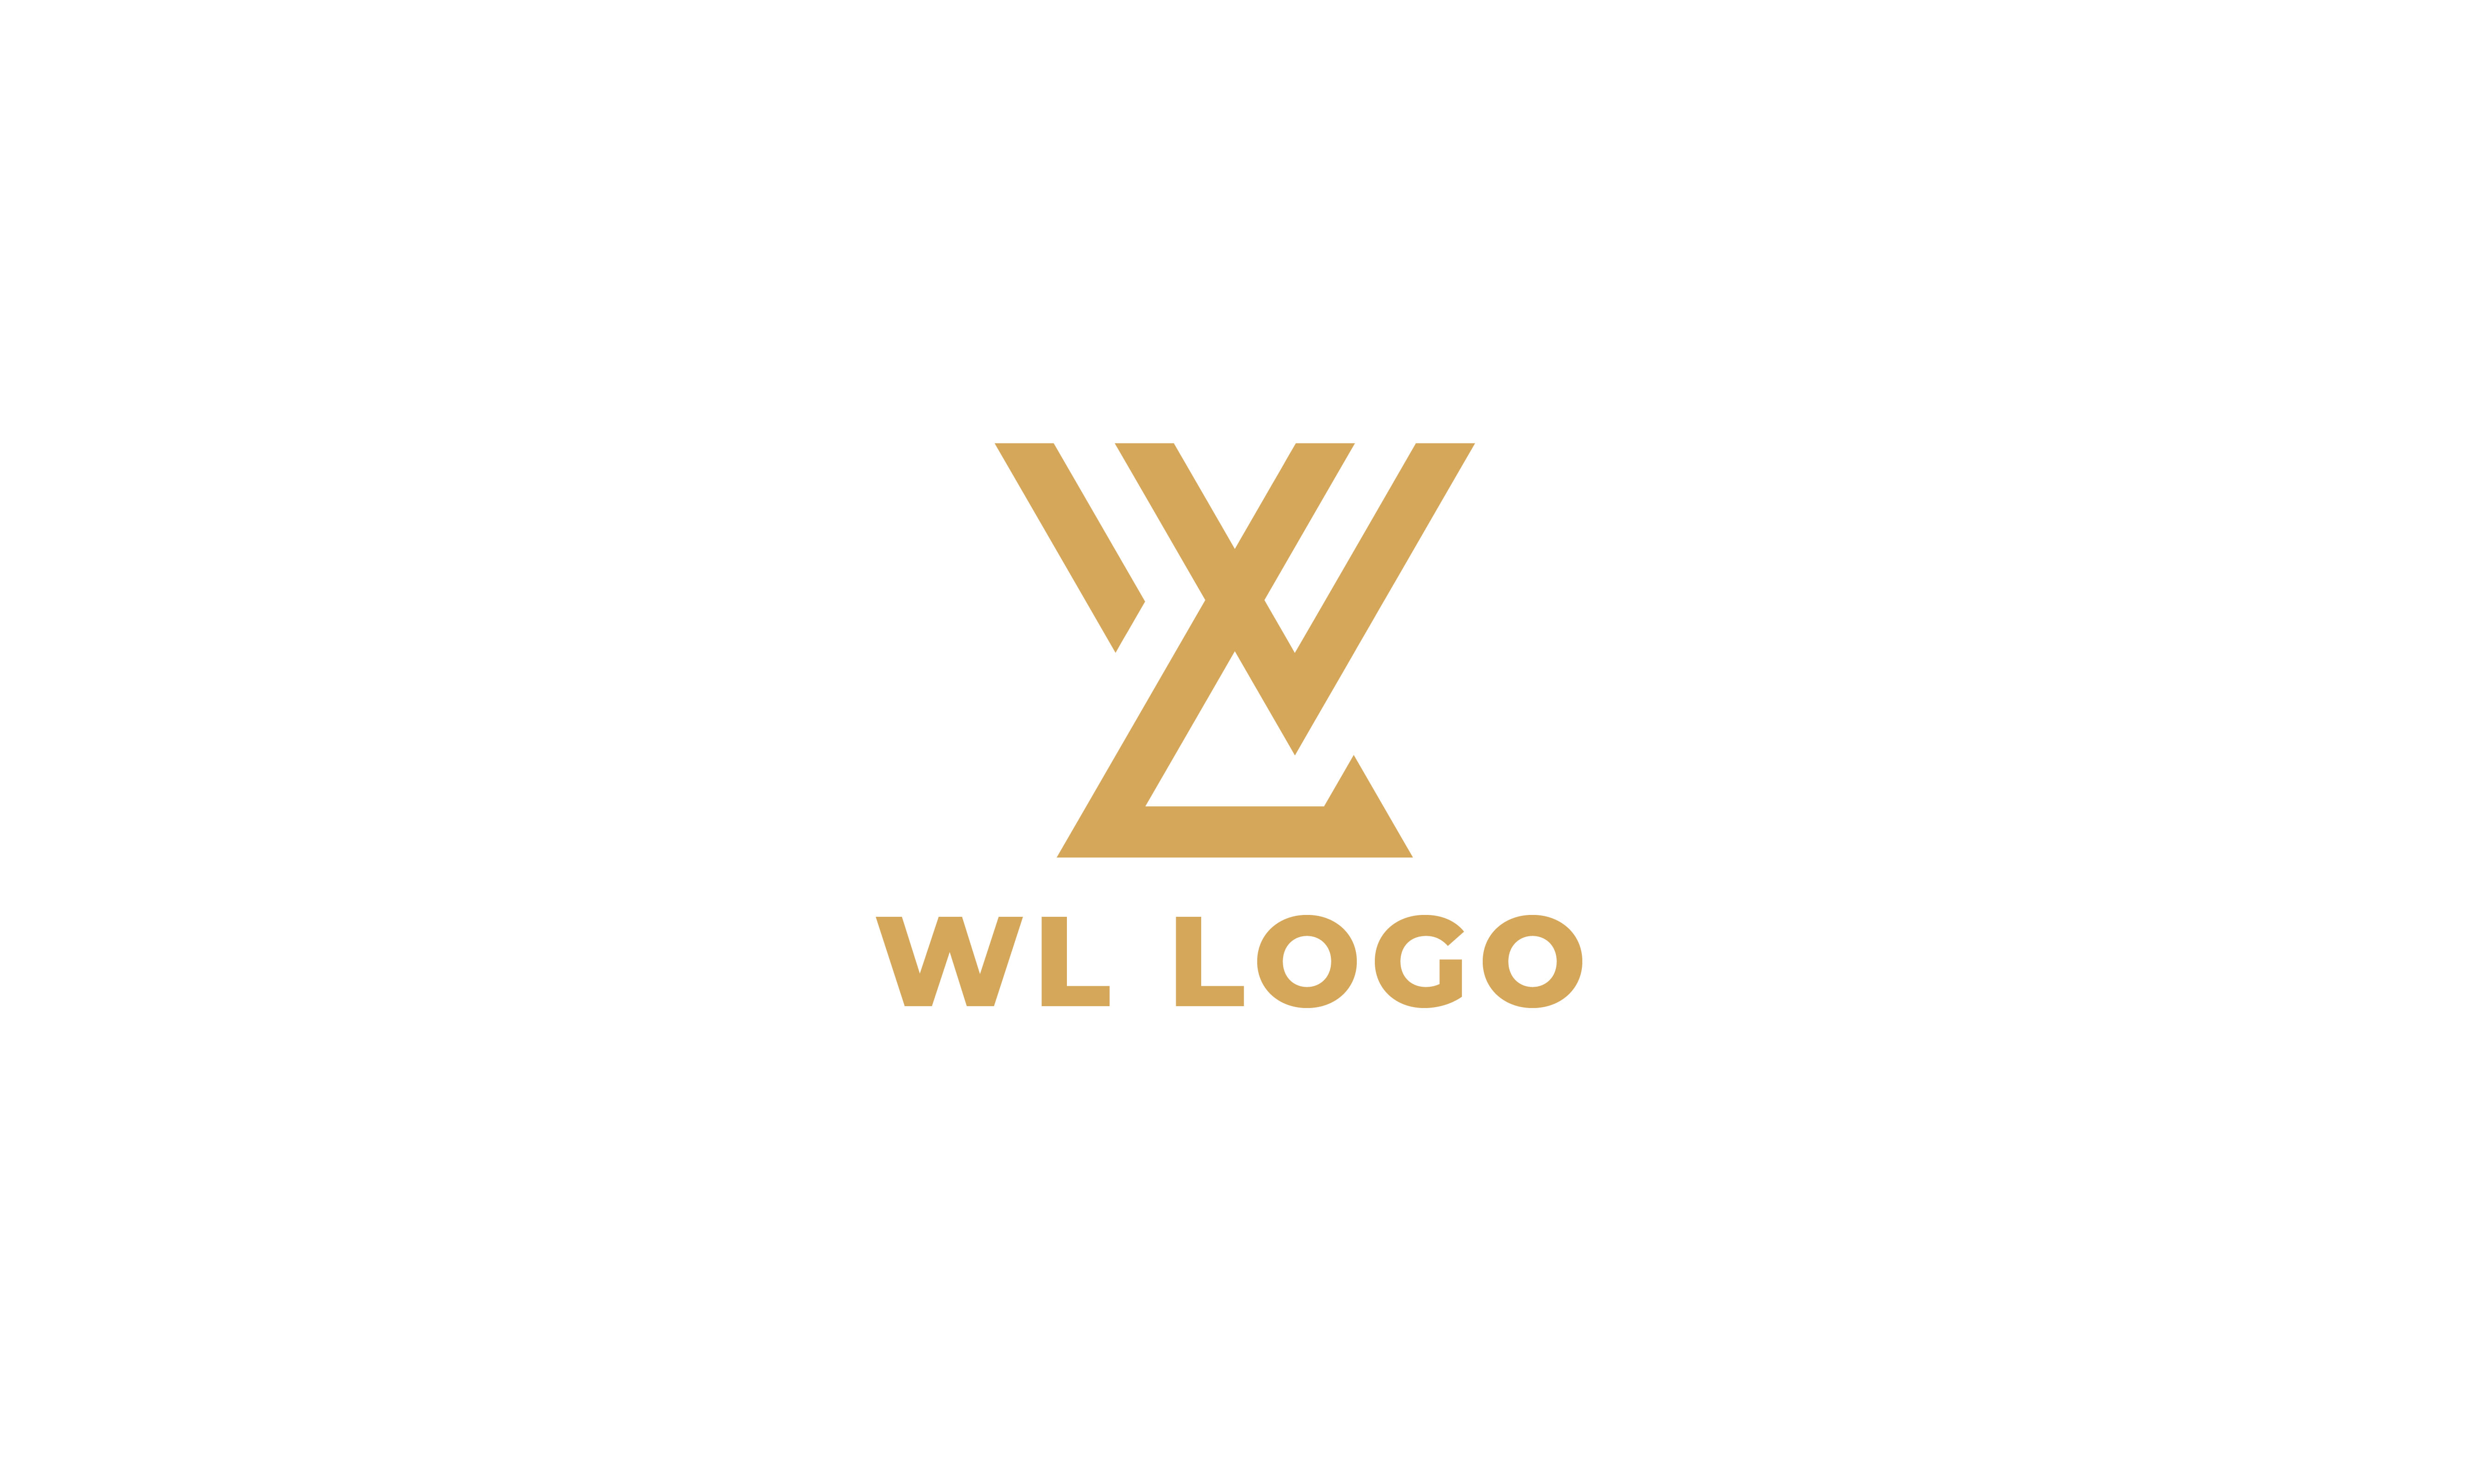 Initial Letter Logo LV Gold And White Color, With Stamp And Circle Object,  Vector Logo Design Template Elements For Your Business Or Company Identity.  Royalty Free SVG, Cliparts, Vectors, and Stock Illustration.